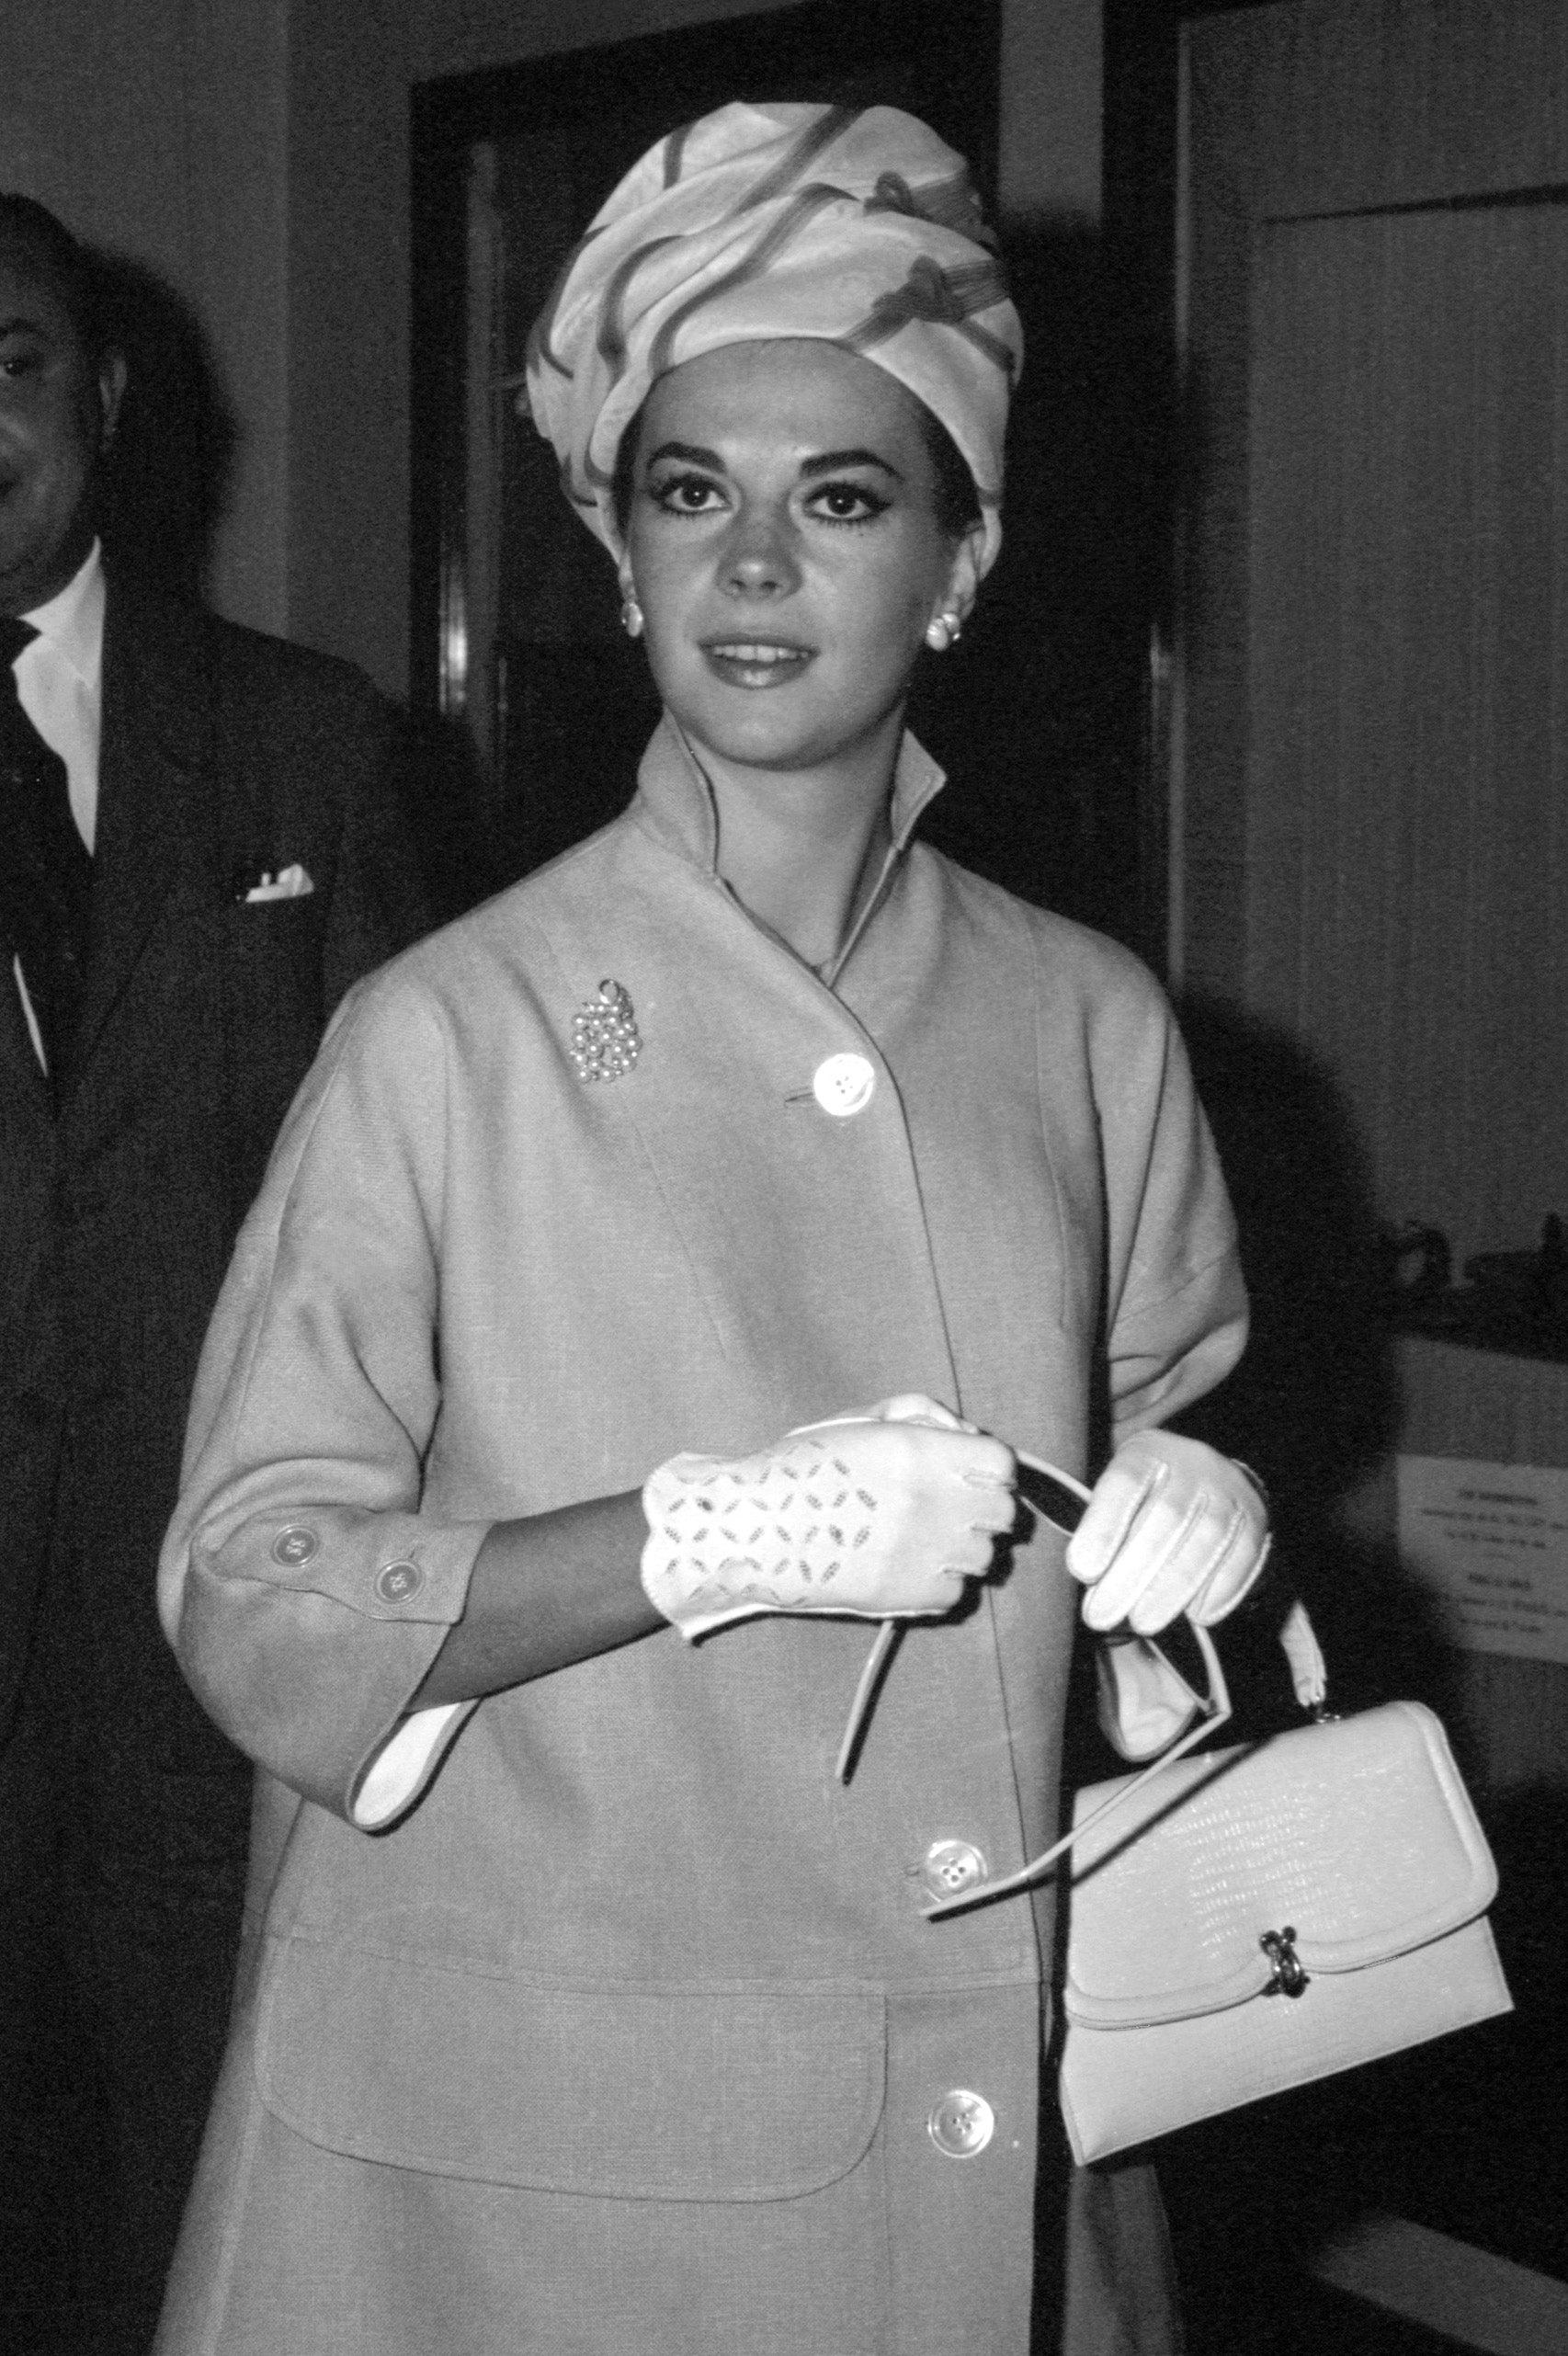 Natalie Wood in France in the 1960s